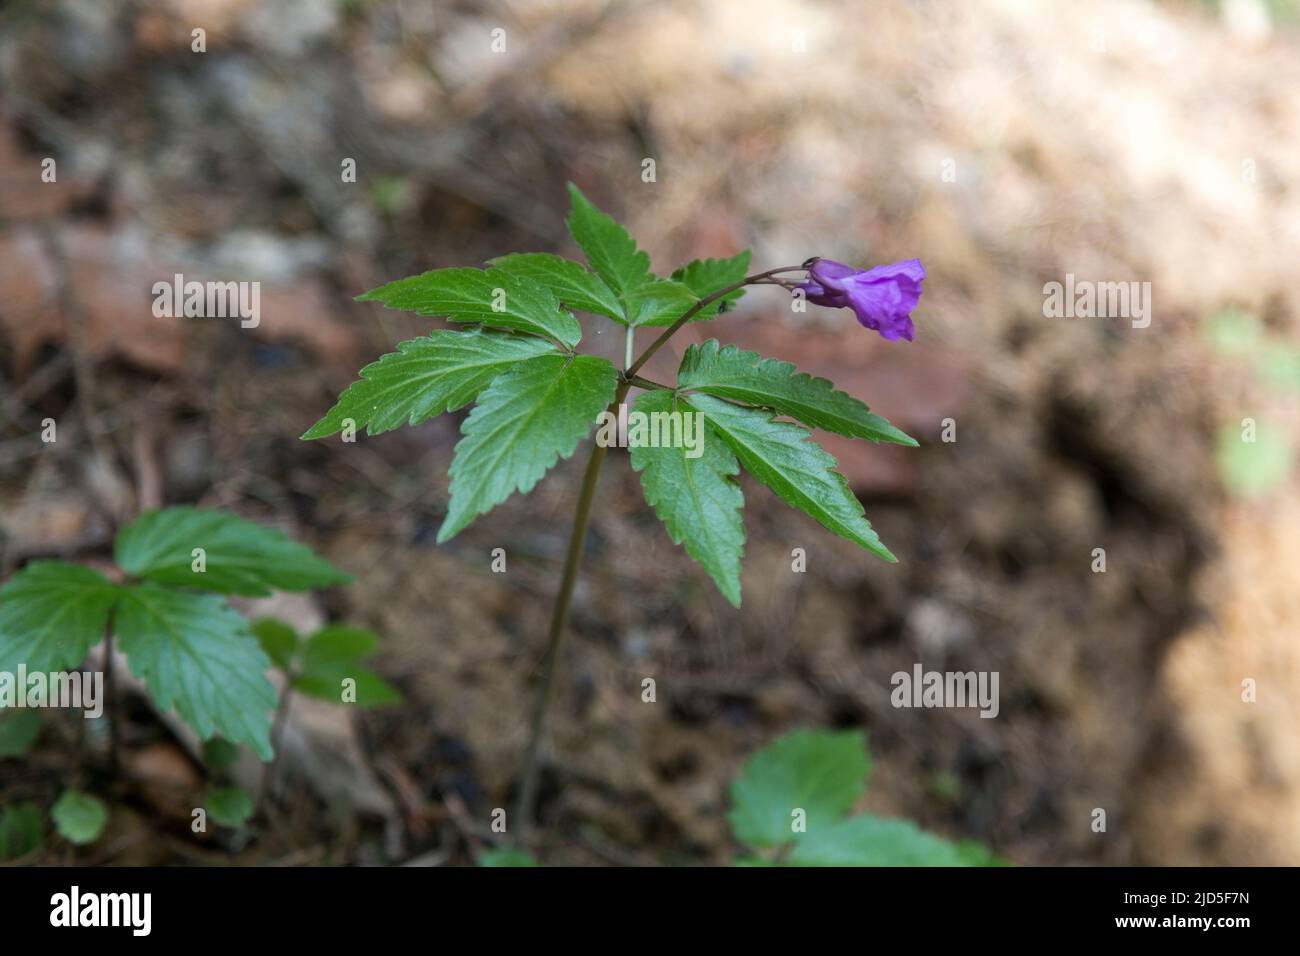 A beautiful violet flower Dentaria glandulosa or Cardamine glanduligera in the green natural background, flora of the Carpathians Stock Photo